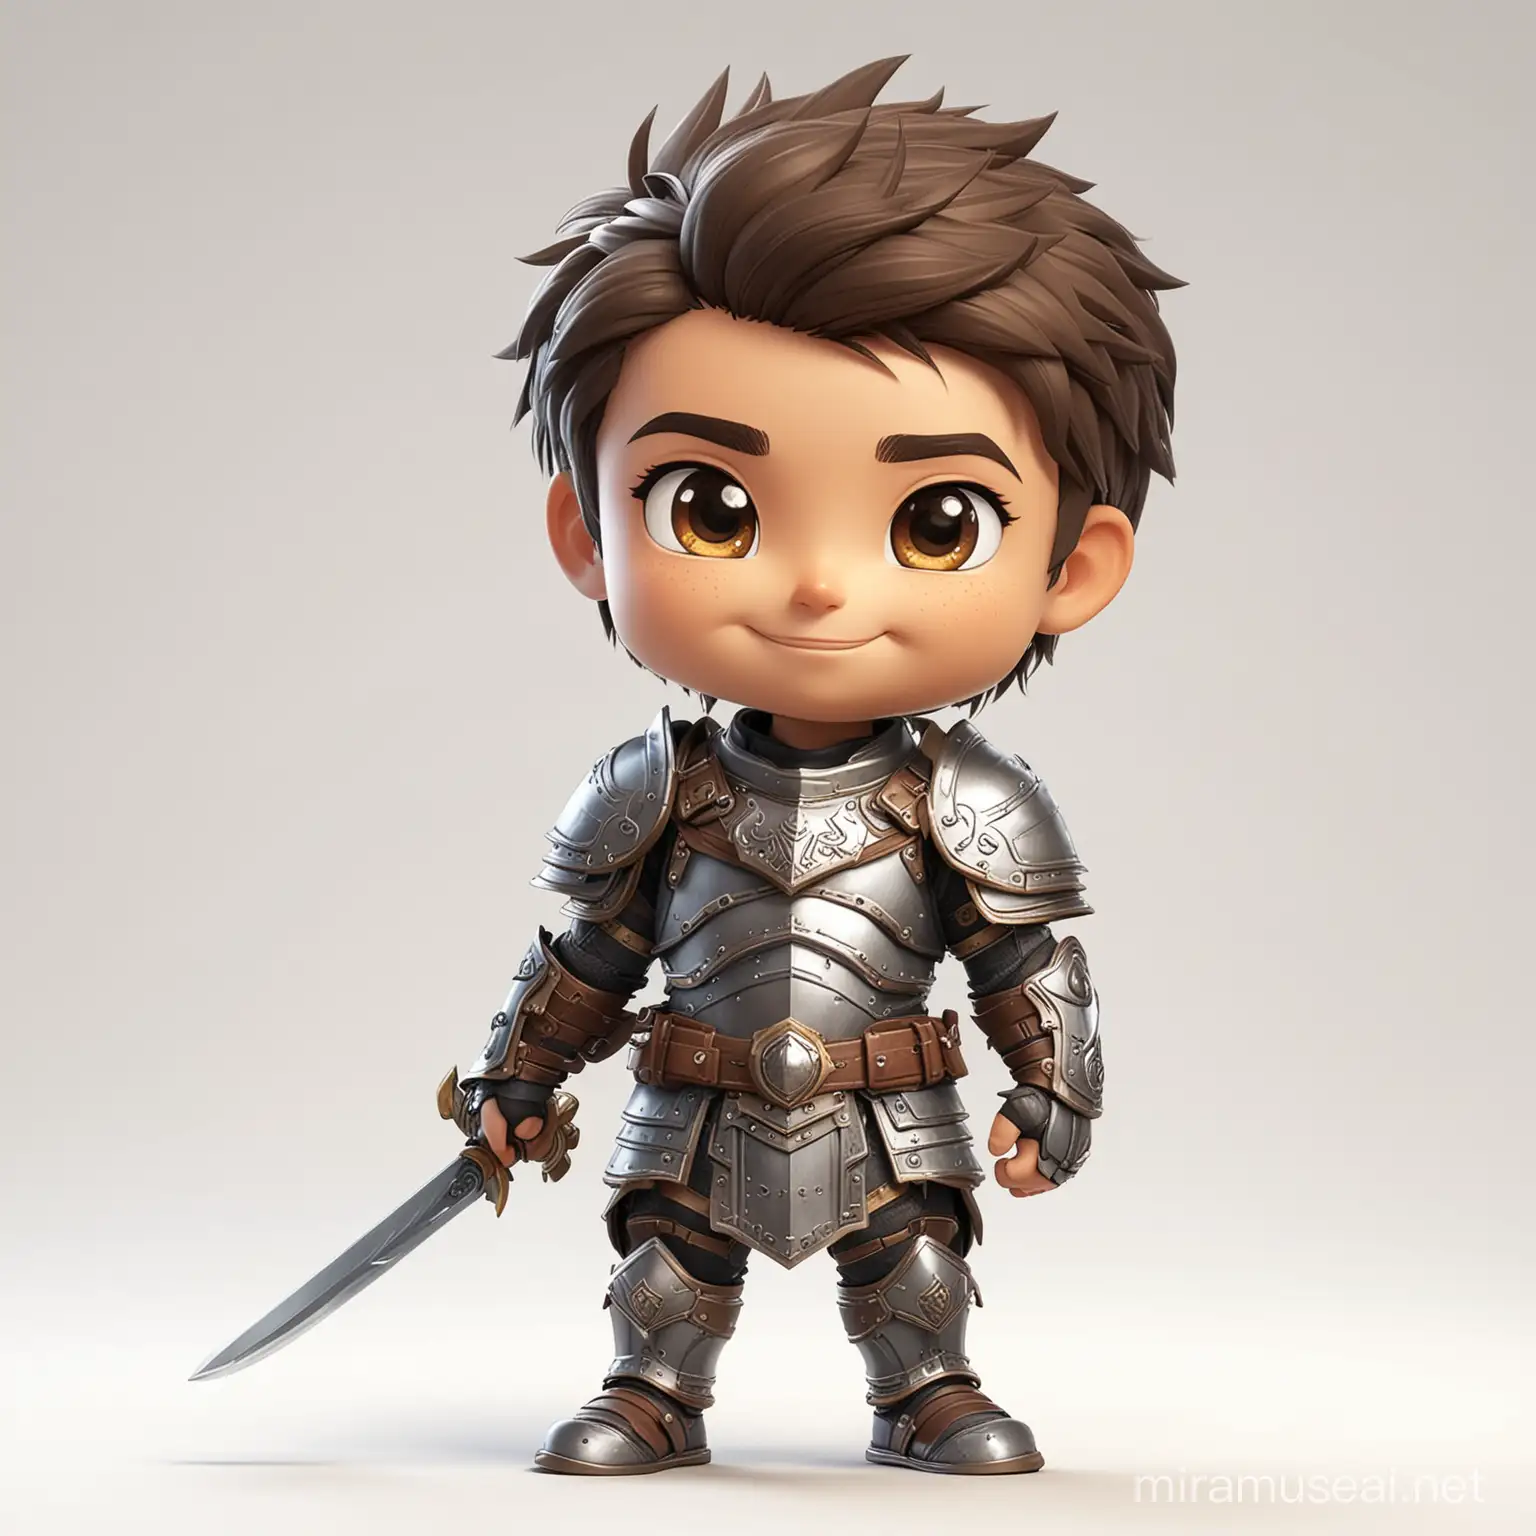 male child warrior smiling wearing armor on a white background full body chibi style